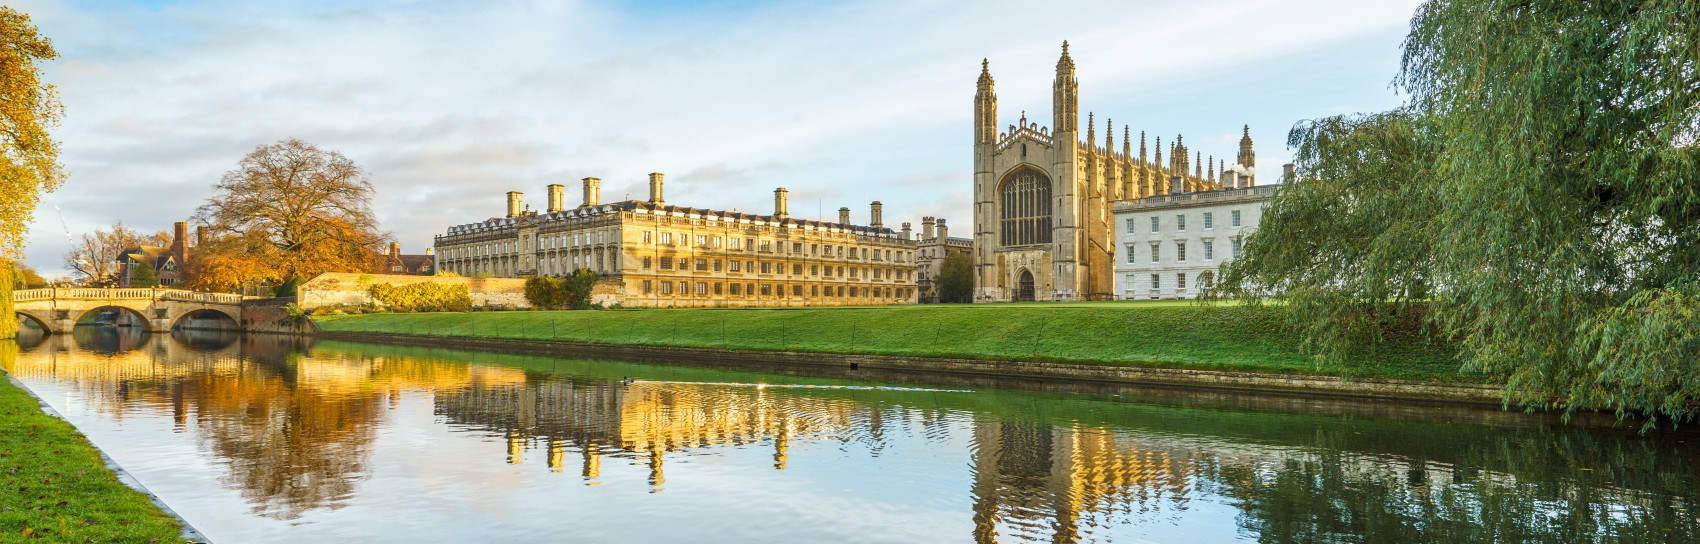 King's College and the River Cam in Cambridge. Photograph by PAJOR PAWEL